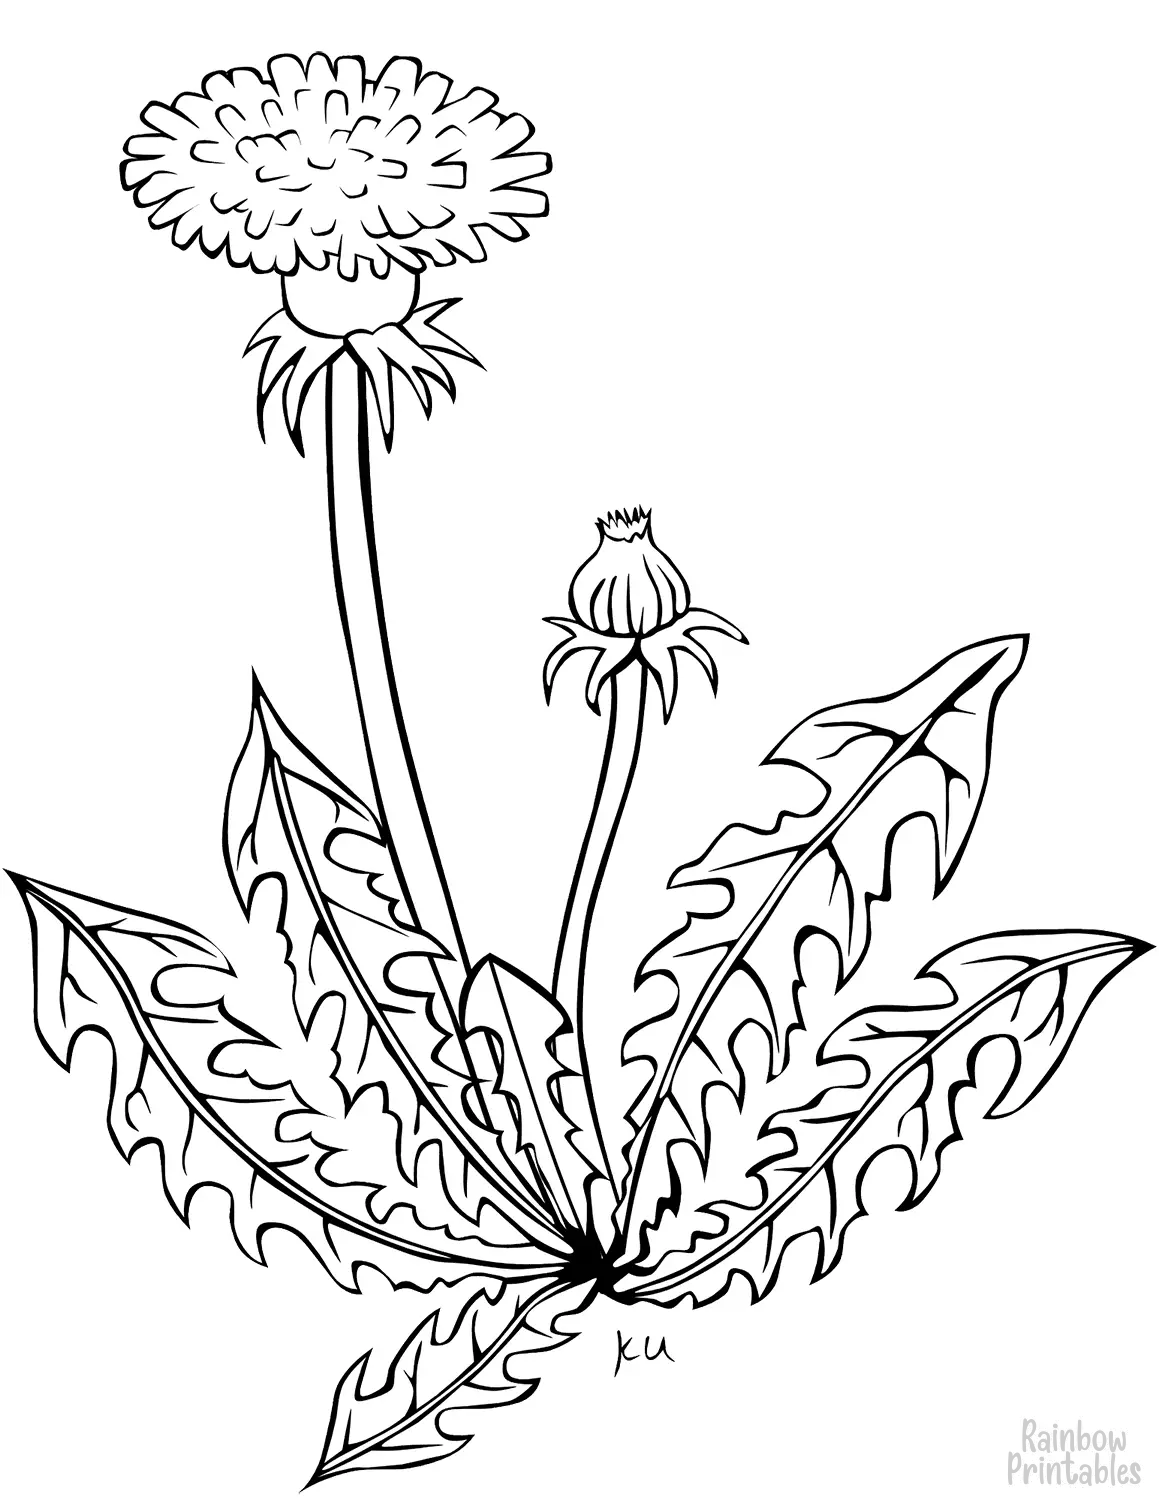 SIMPLE-EASY-line-drawings-DANDELION-FLOWER-coloring-page-for-kids Outline